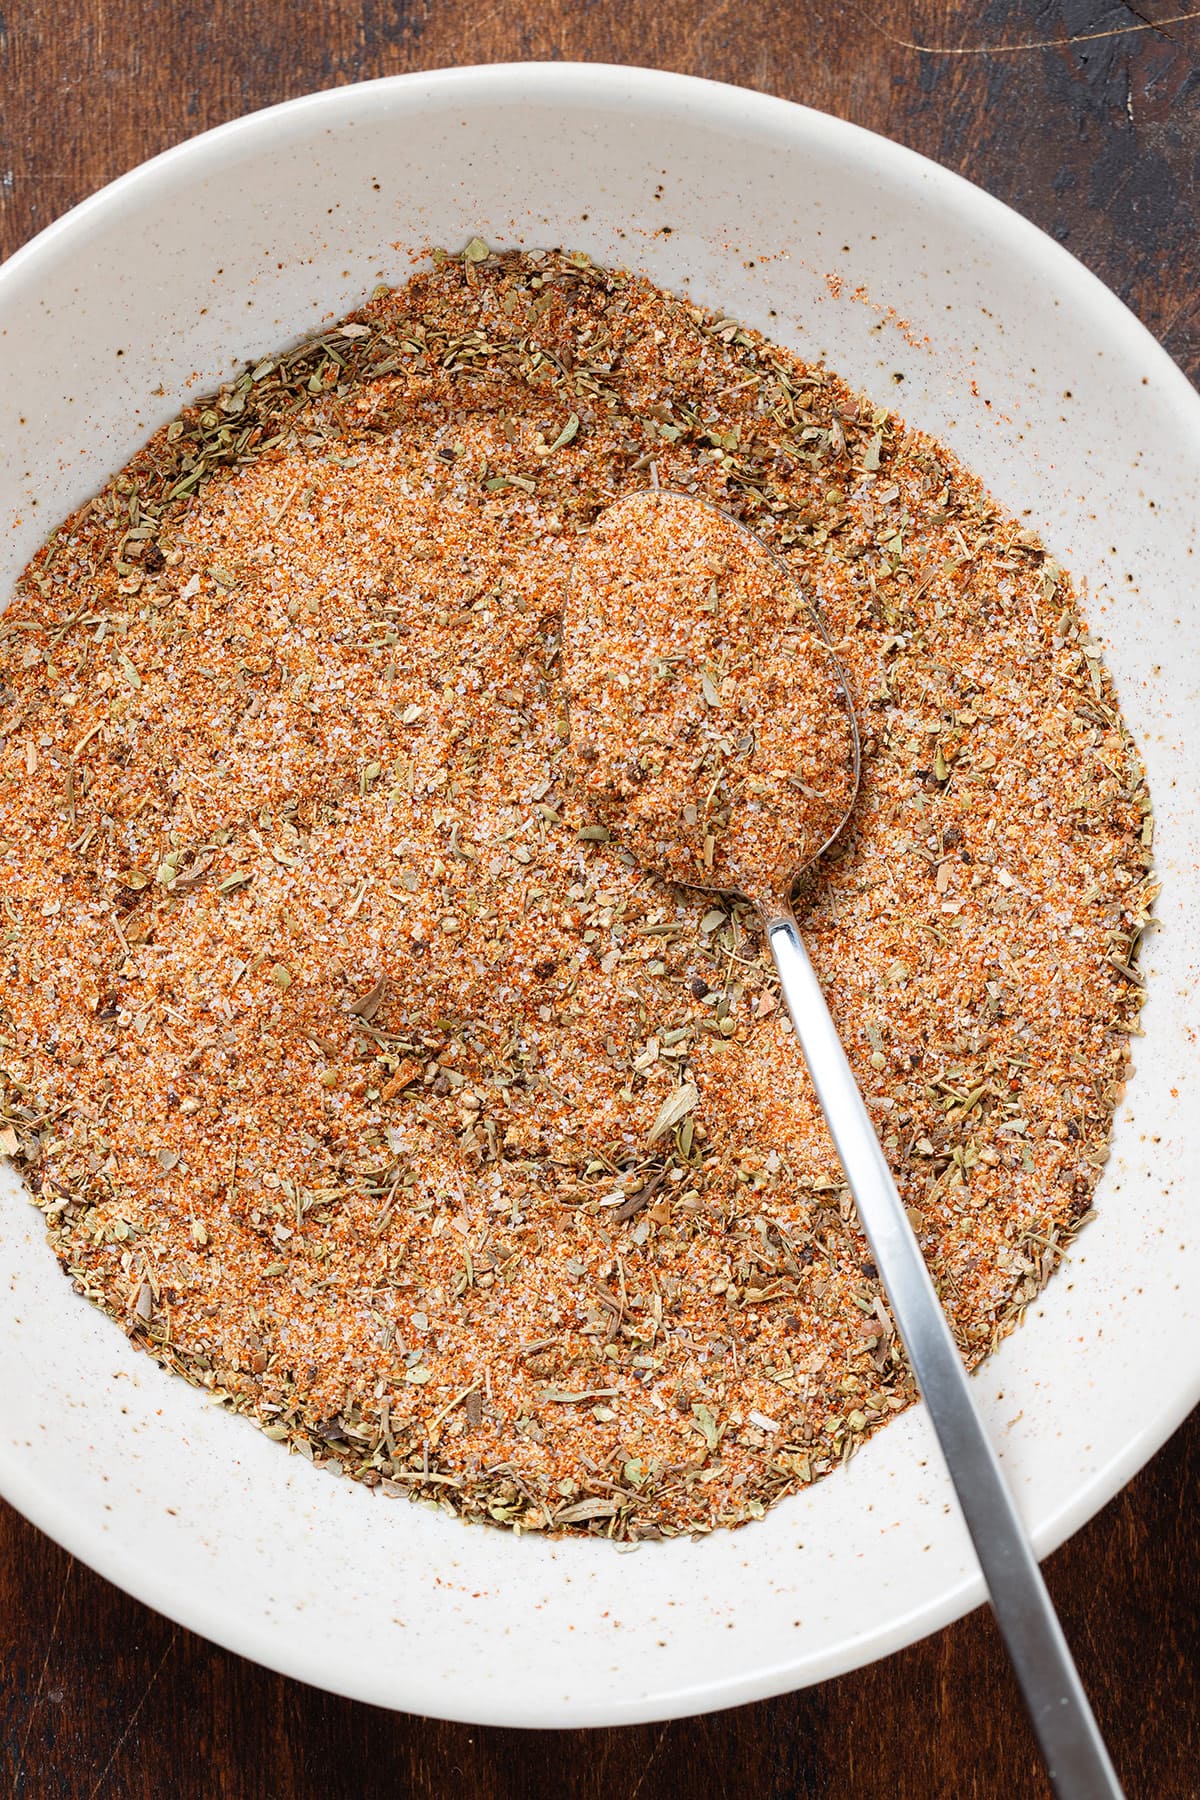 French fry seasoning all mixed together in a low bowl with a spoon on the right side.